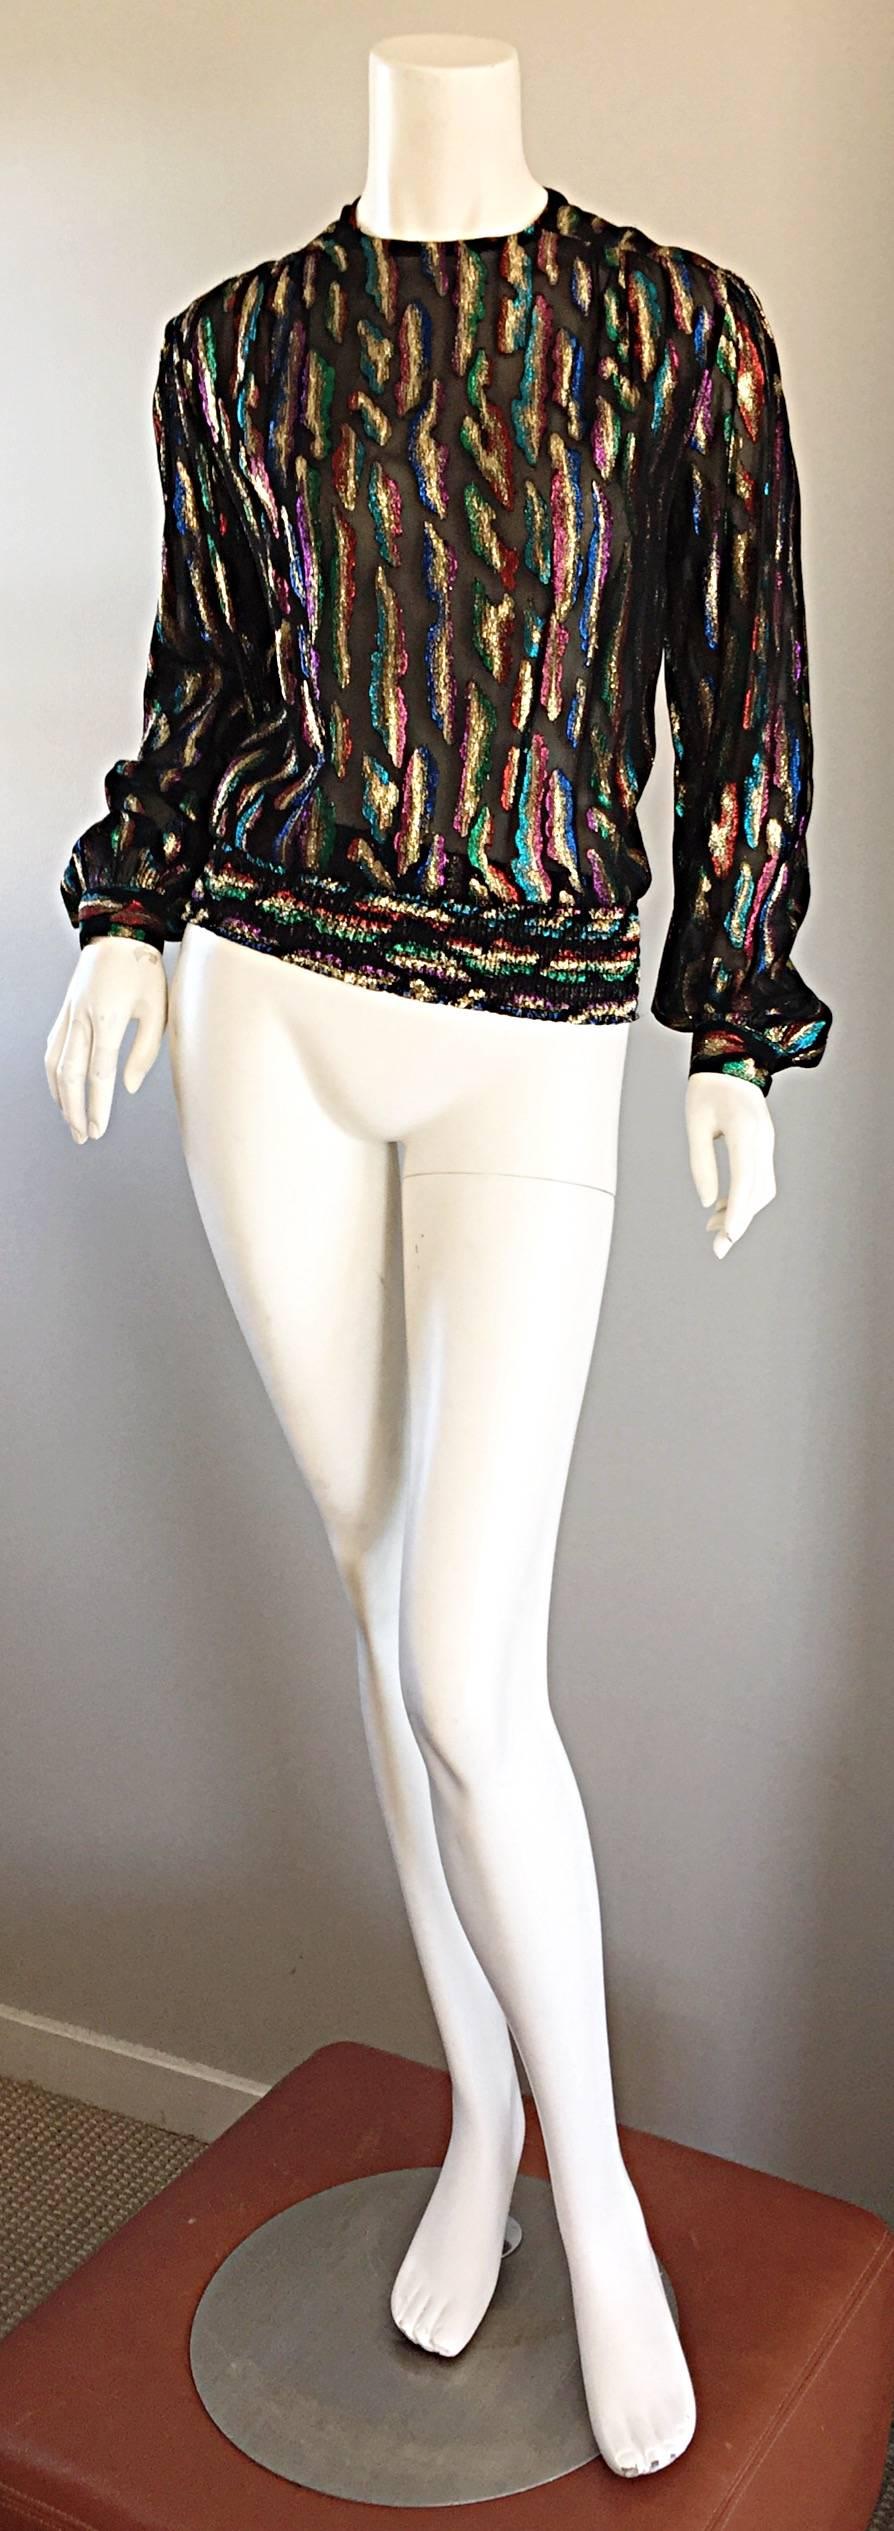 Gorgeous vintage LLYOD WILLIAMS black semi-sheer blouse, with abstract metallic threading throughout! Flattering ruched stretch waist. Button closure, with peek-a-boo back neck. Buttons at each cuff. Looks amazing on, and can easily transition from